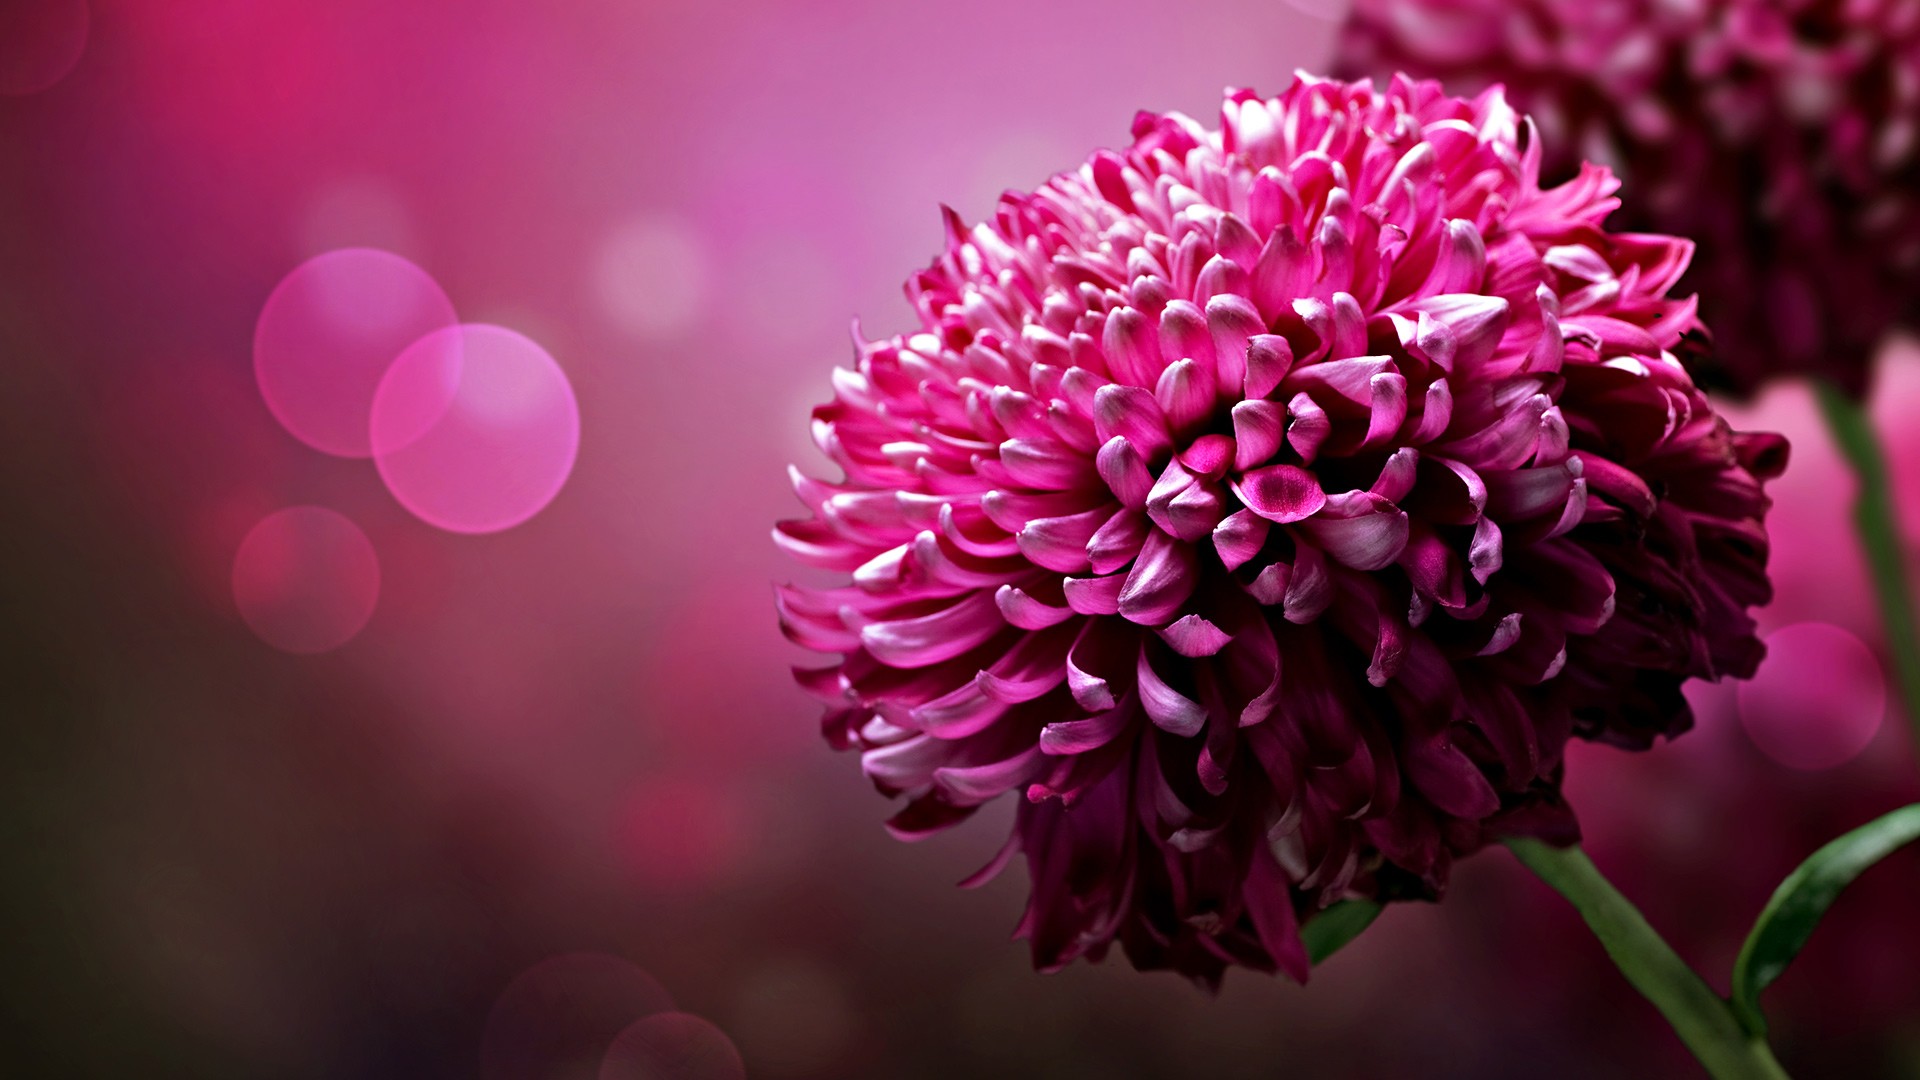 Pretty Purple Flower Wallpaper Images amp Pictures   Becuo